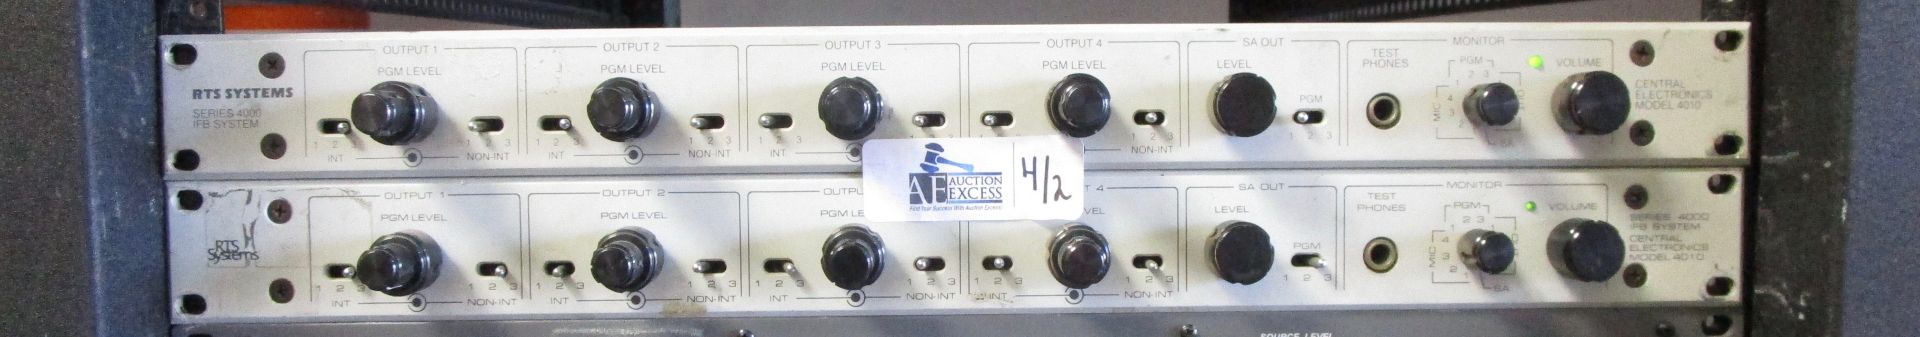 LOT OF 2 RTS SYSTEMS SERIES 4000 IFB SYSTEM